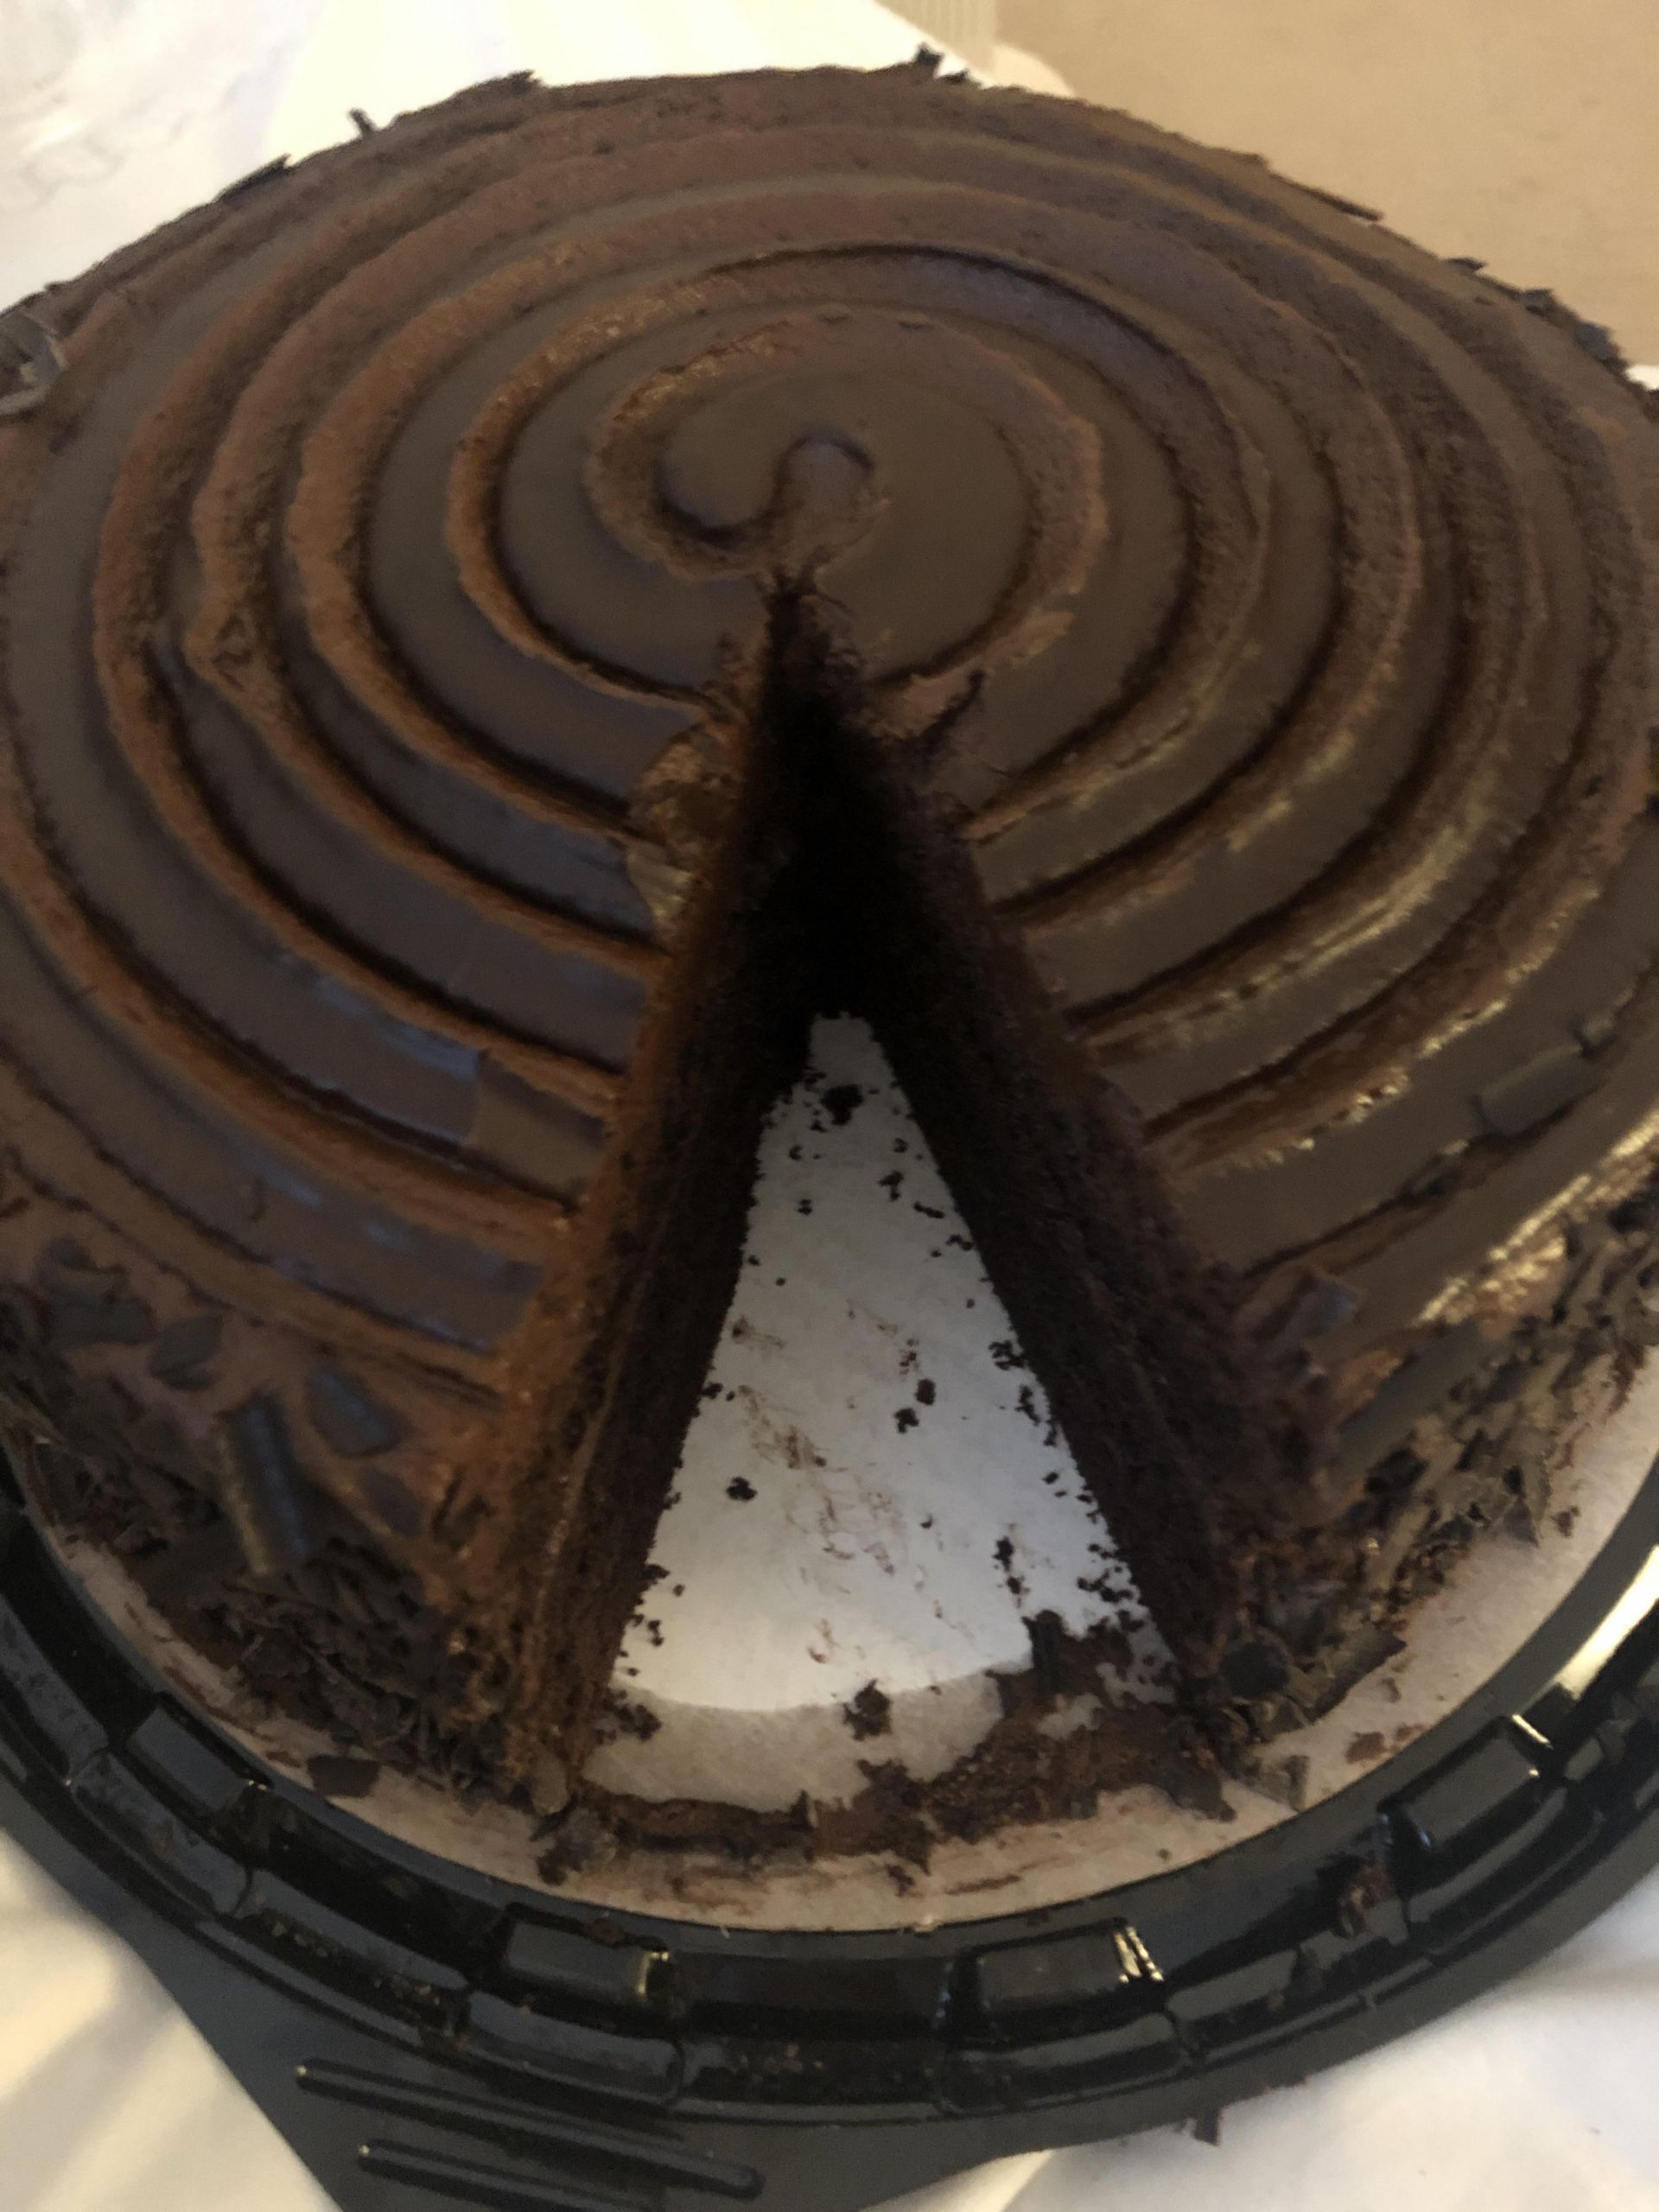 Costco Chocolate Cake
 So disappointed in the chocolate cake 😩 it’s so dry Costco